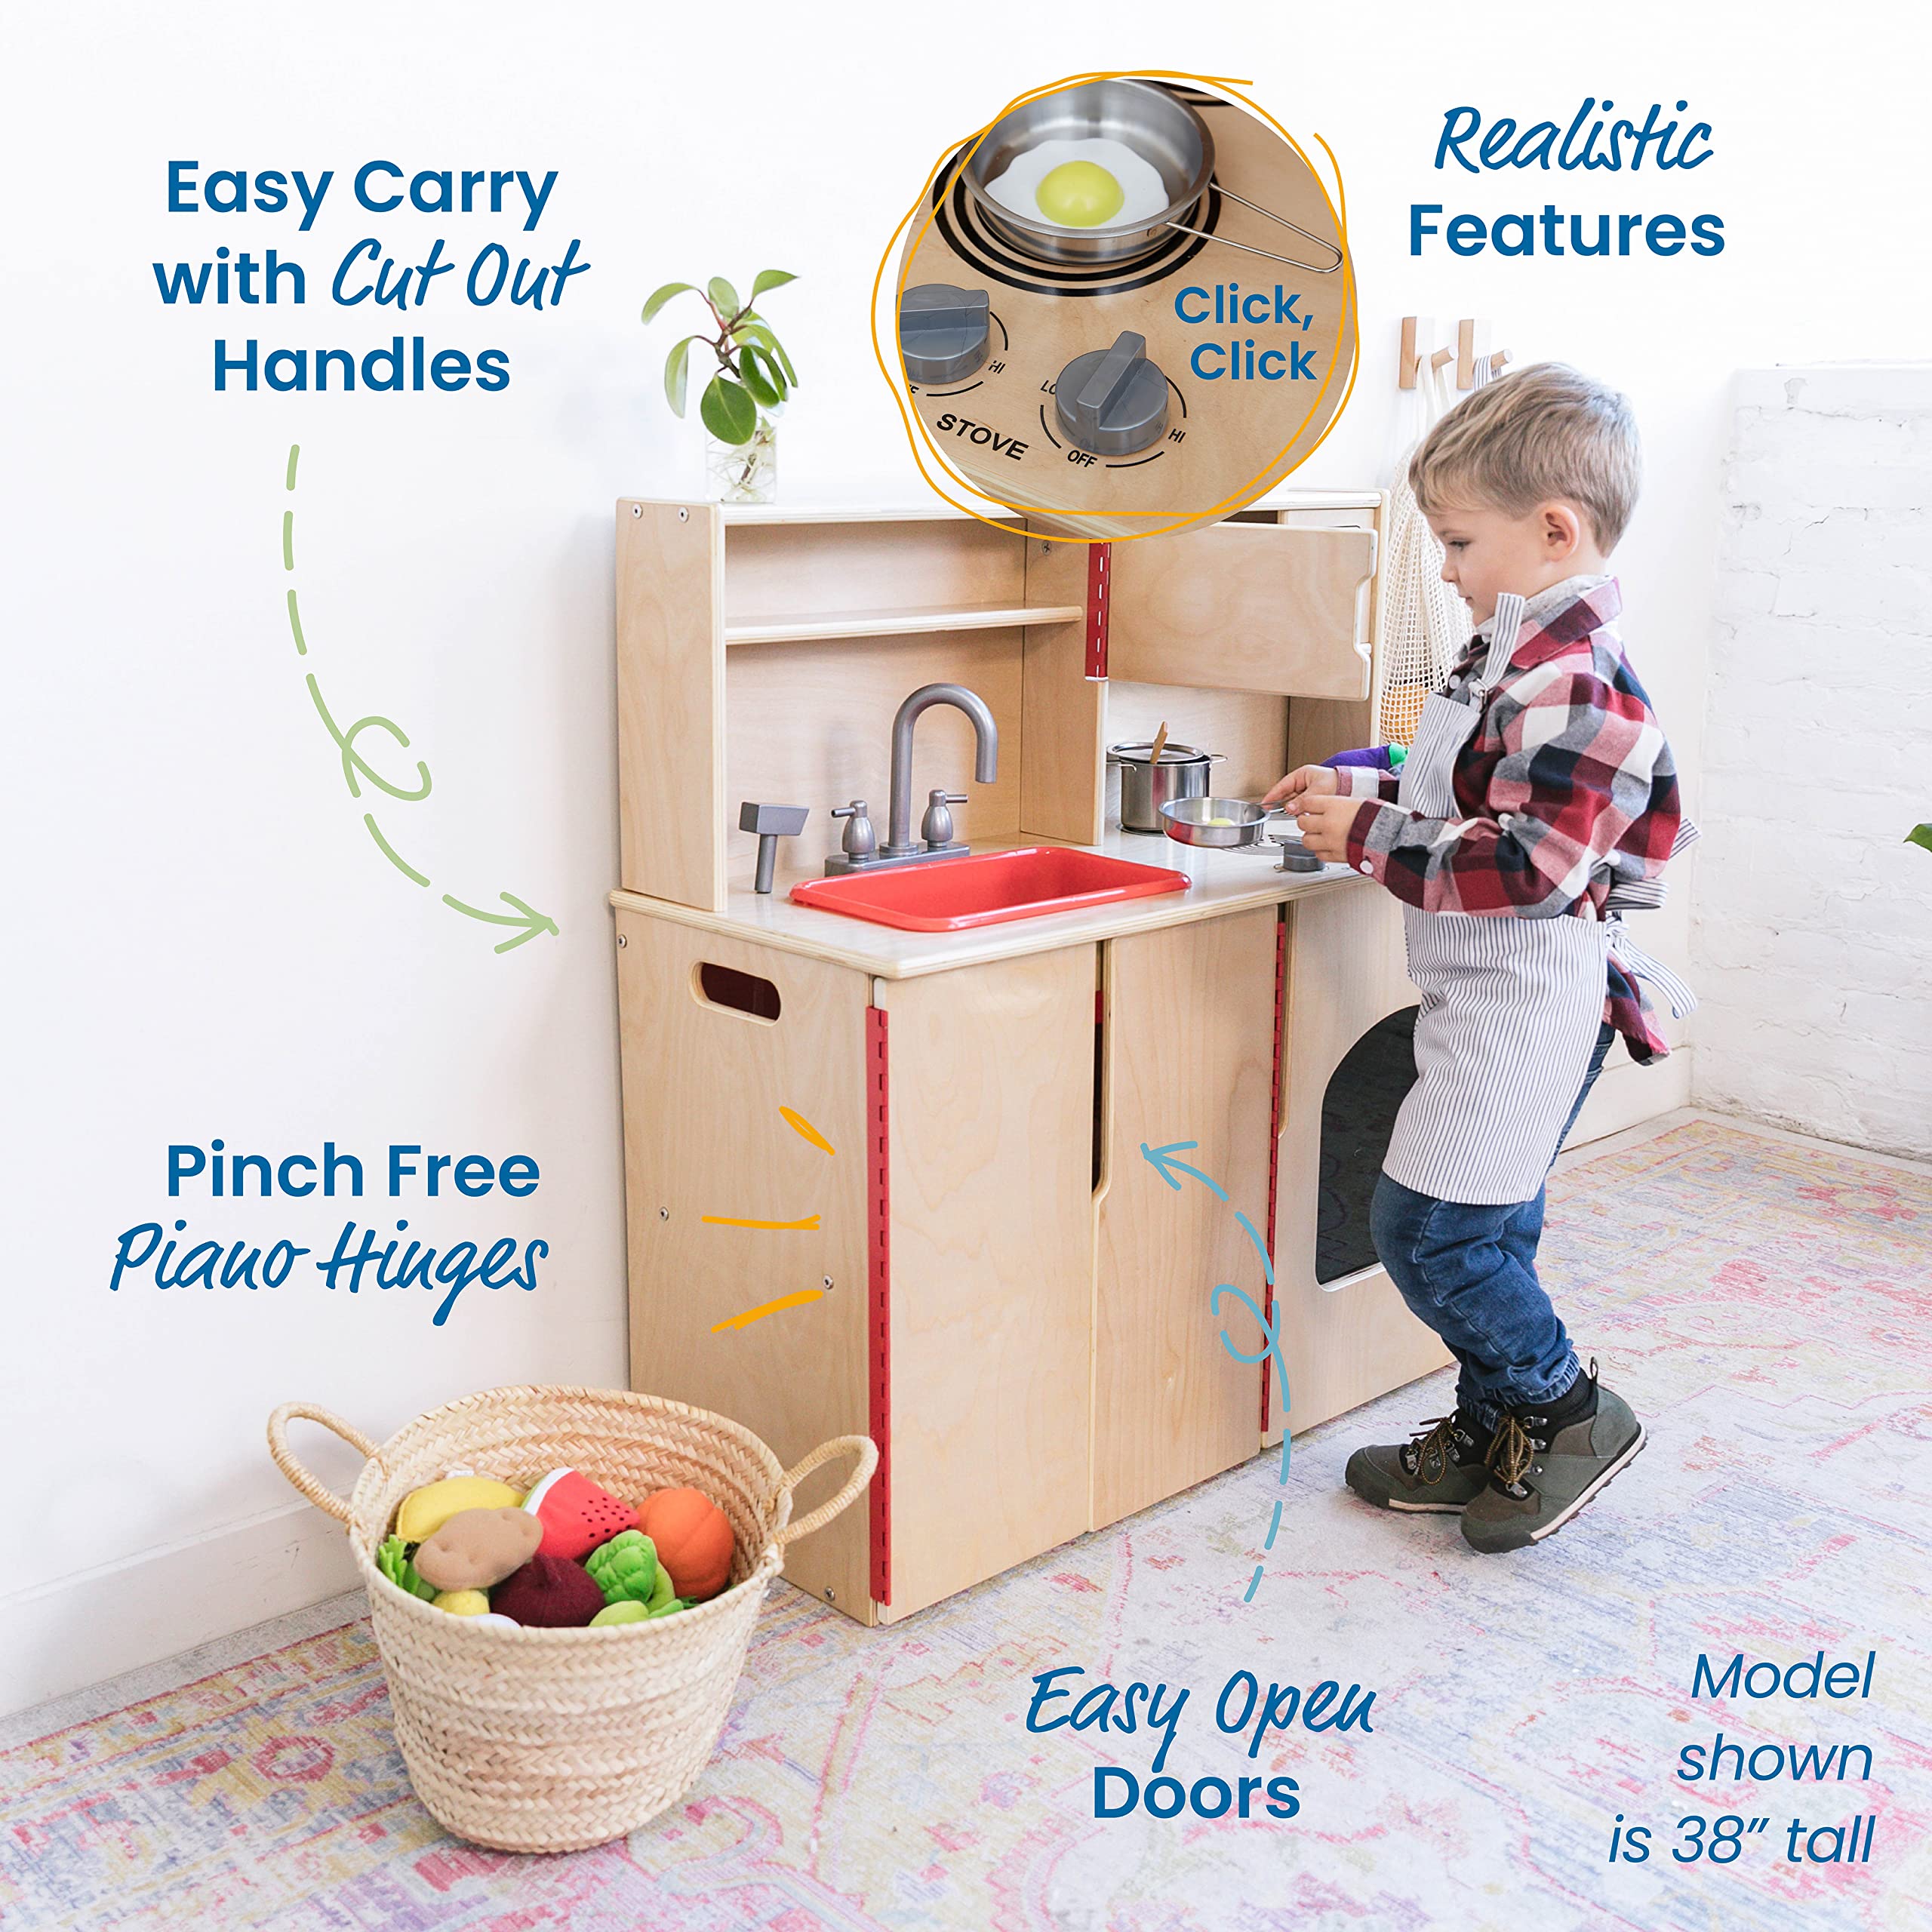 ECR4Kids 4-in-1 Kitchen, Sink, Stove, Oven, Microwave and Storage, Play Kitchen, Natural